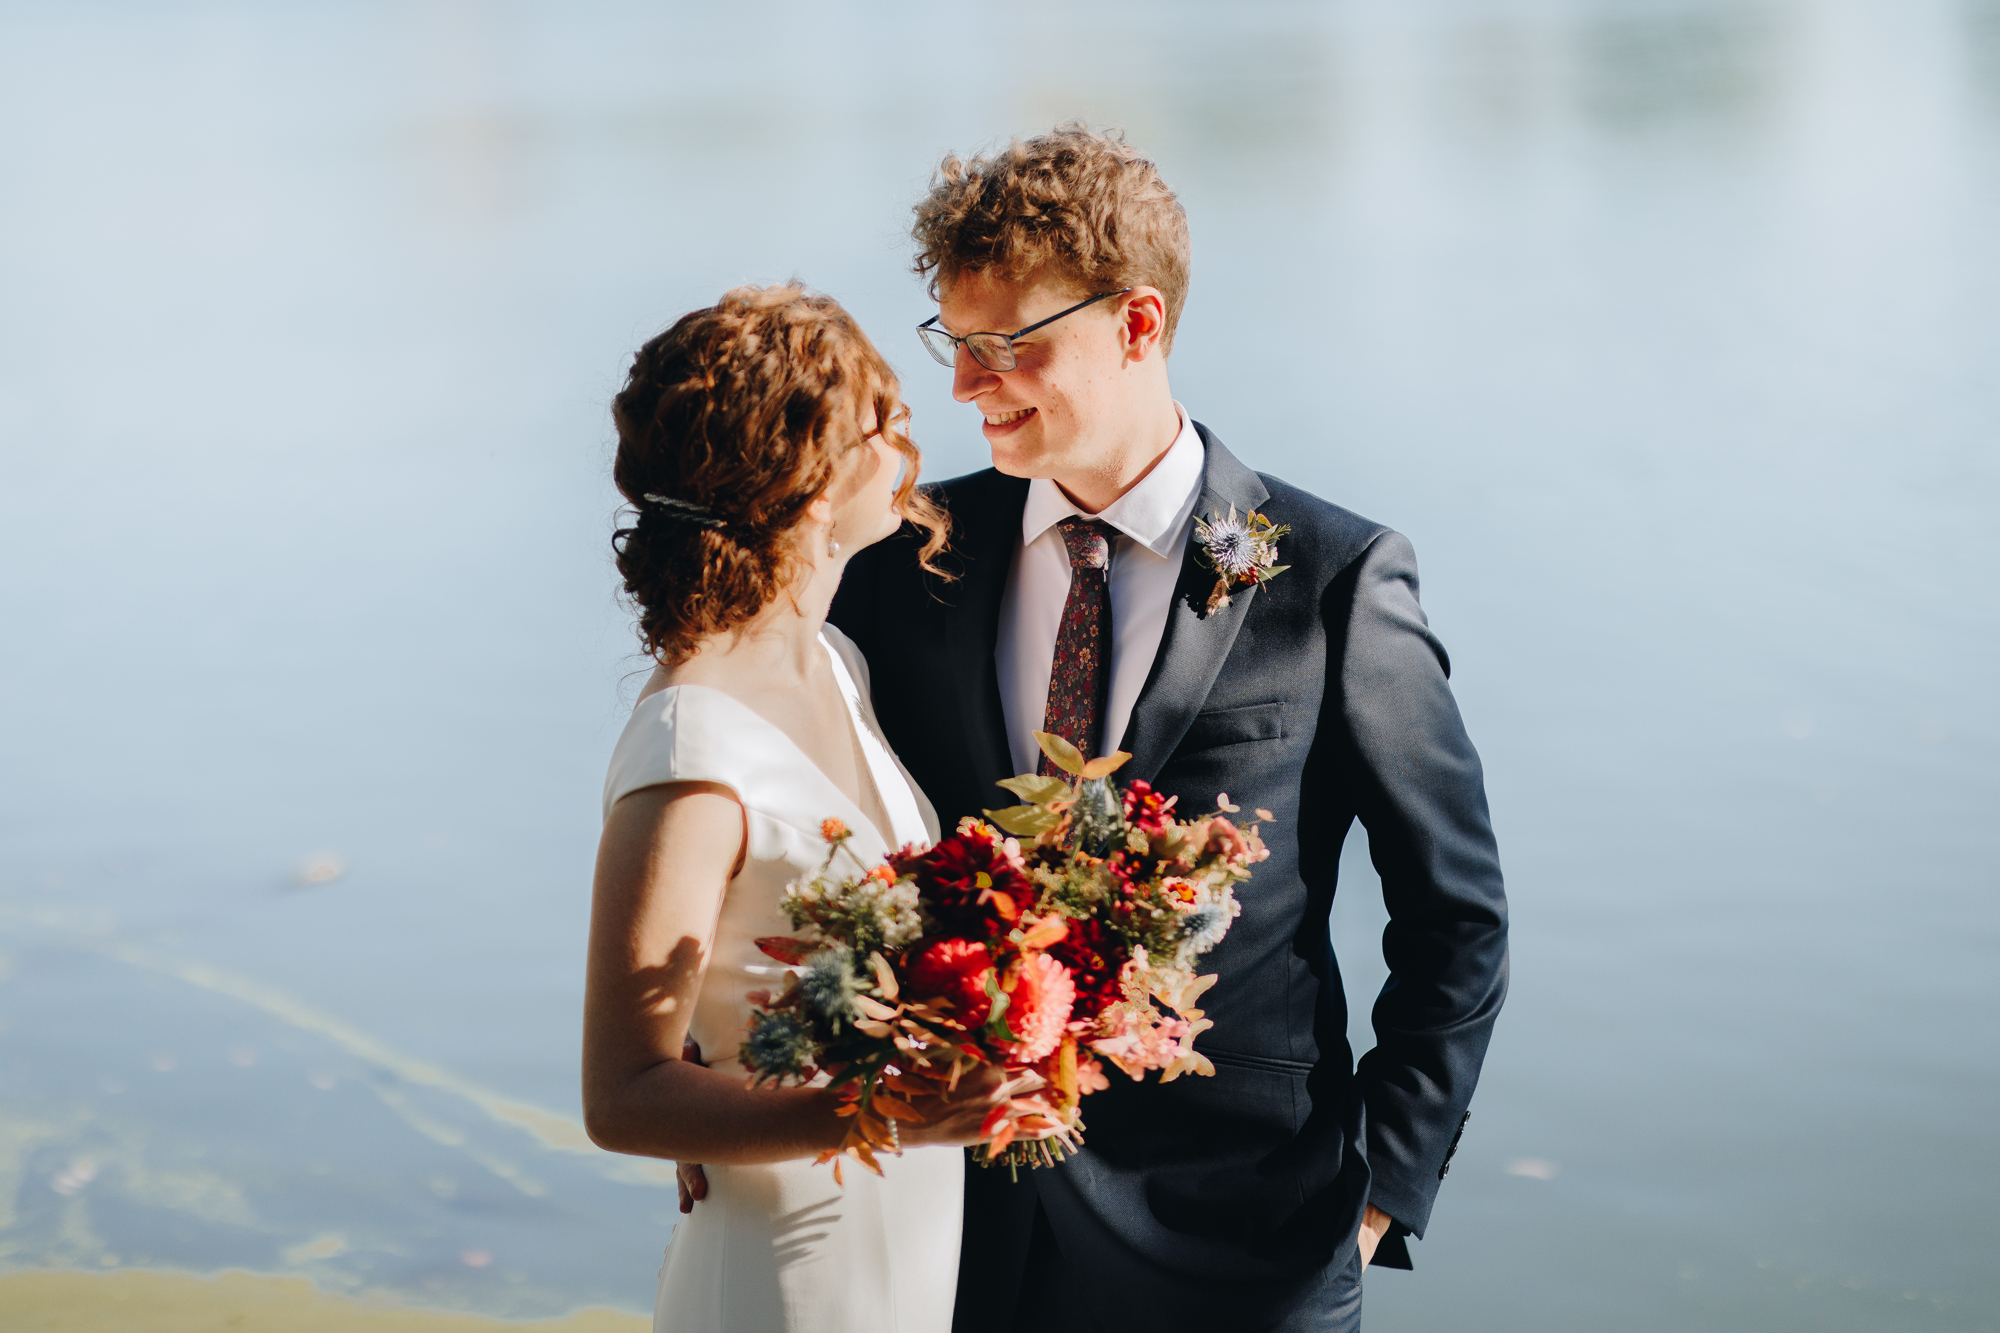 Prospect Park Pond wedding photo with fall bridal bouquet